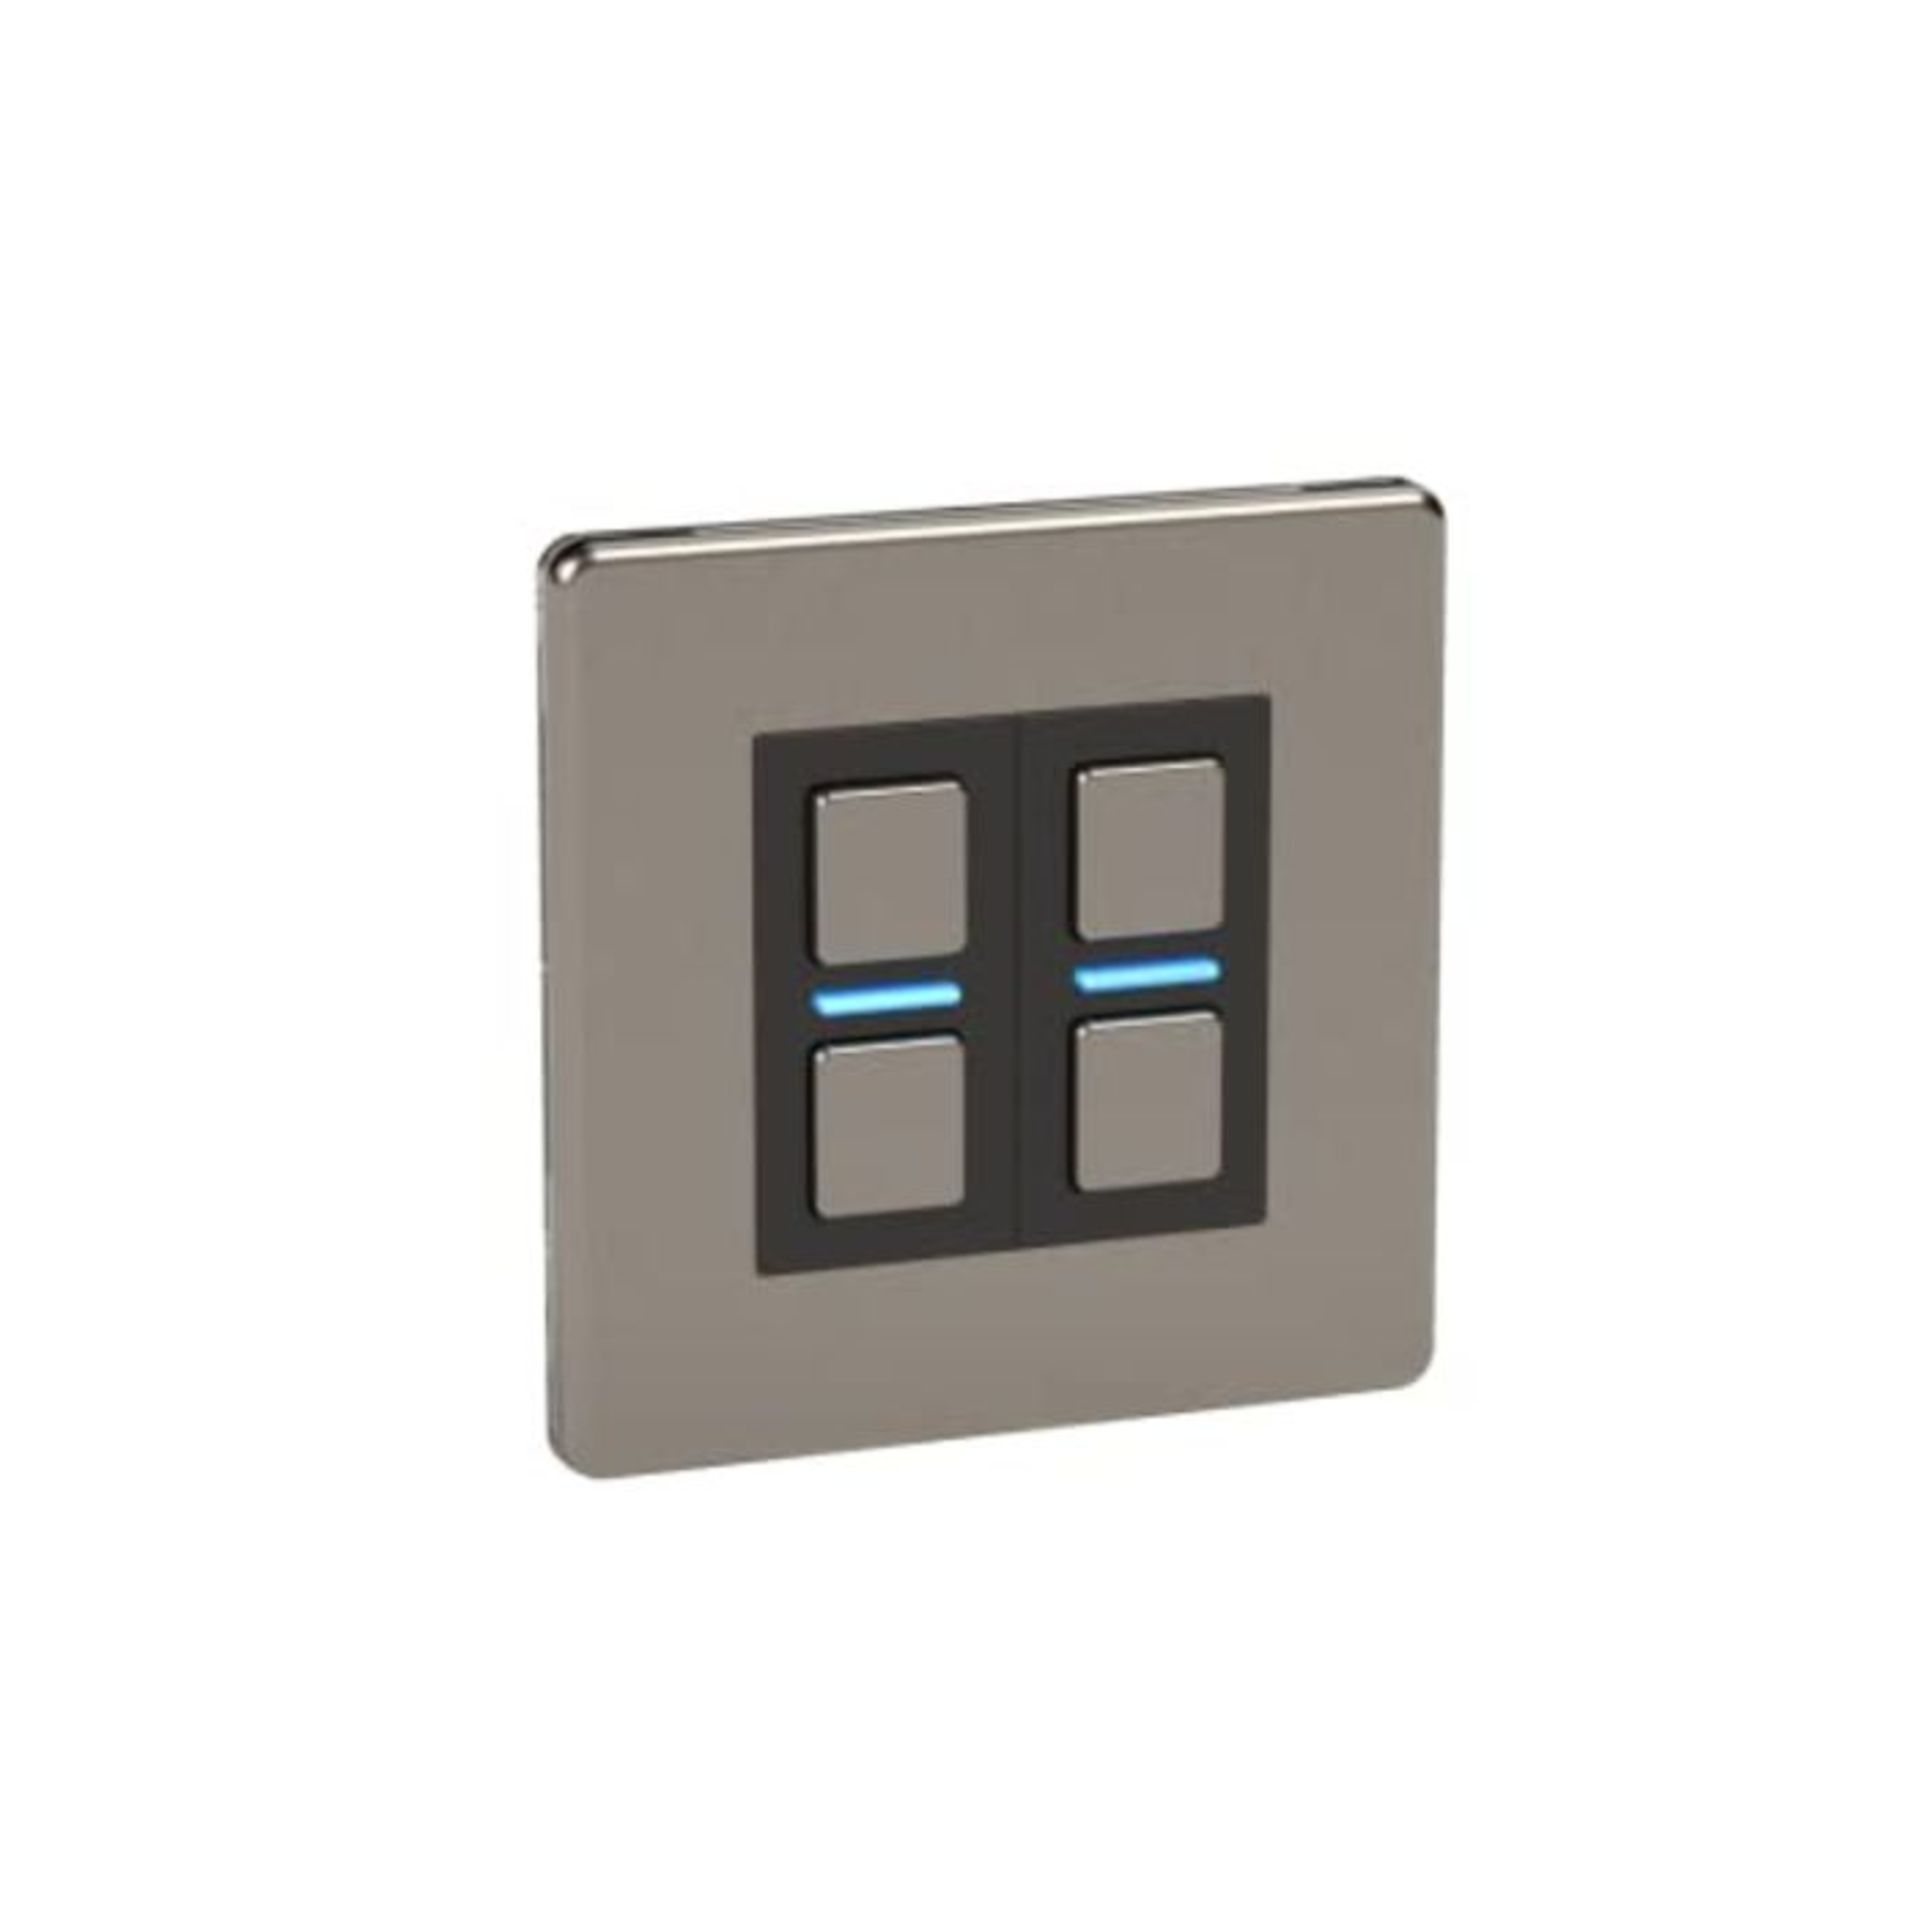 RRP £111.00 Lightwave LP22MK2 Smart Dimmer with Energy Monitoring, 2 Gang, Stainless Steel - Works